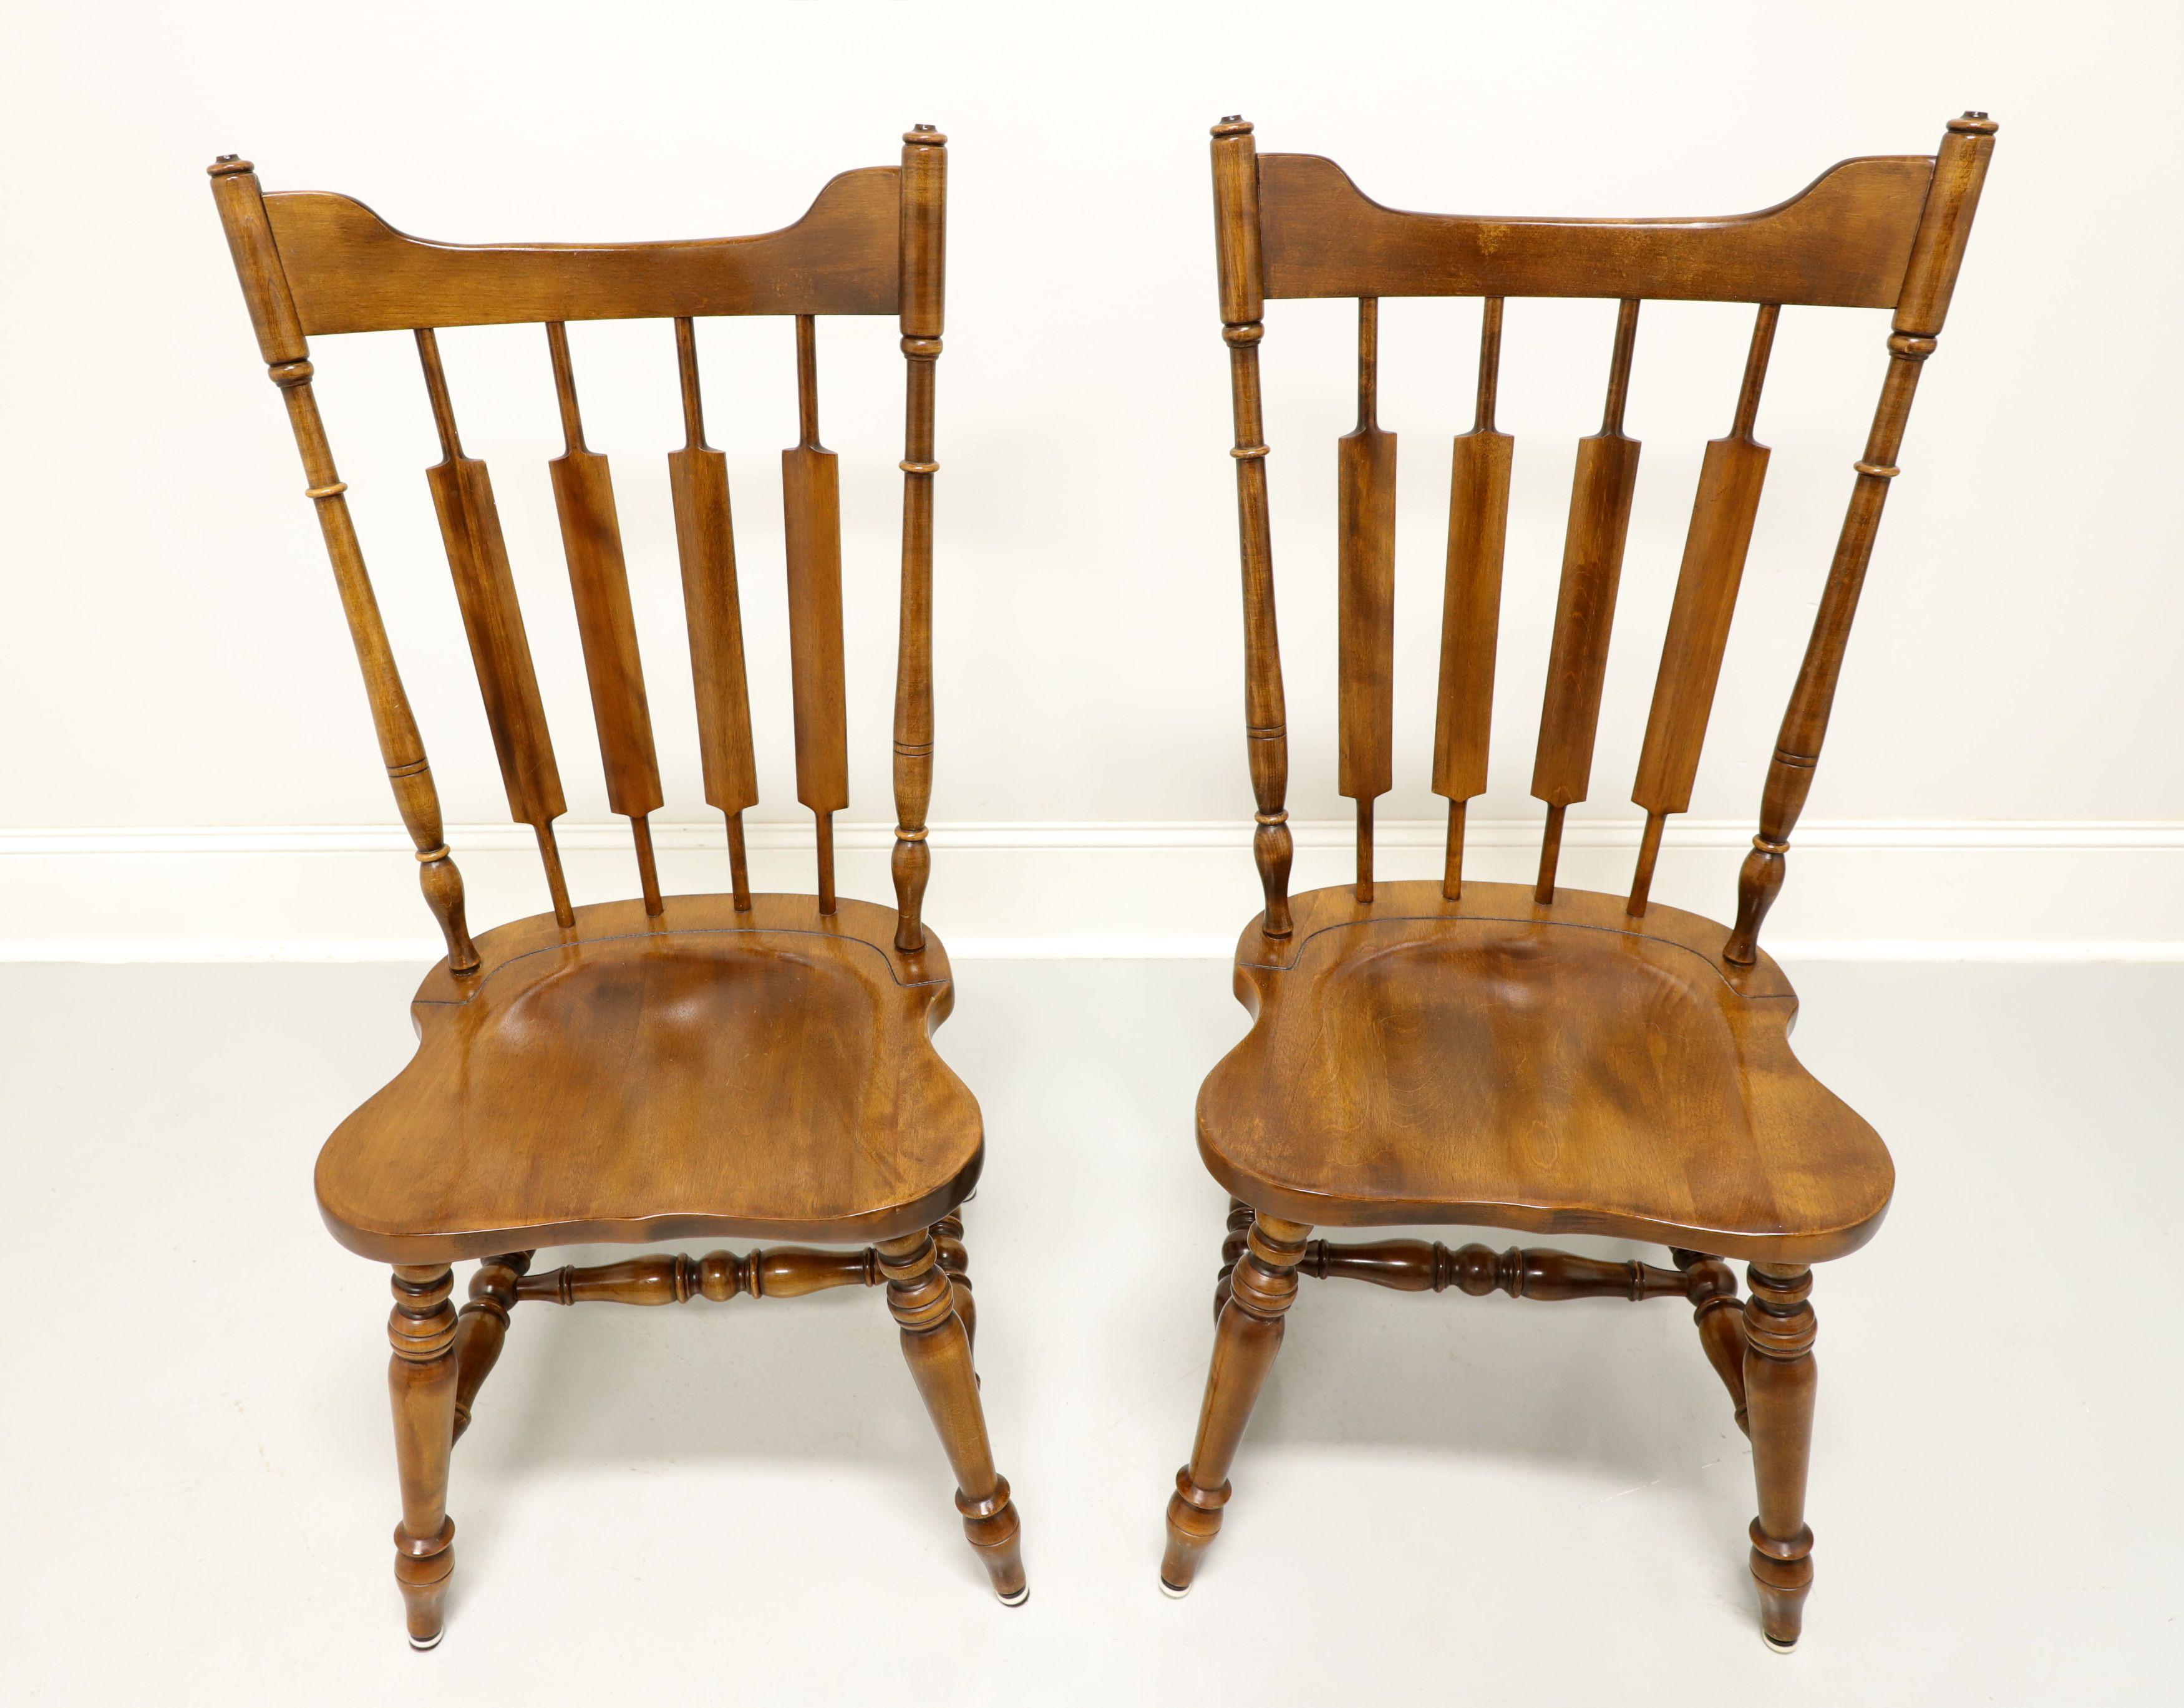 A pair of Early American Windsor style dining side chars by Temple Stuart, their 829 Rockingham. Maple with carved crestrail, cattail spindles backrest, saddle shape seat, turned legs and stretchers. Made in the USA, in the late 20th